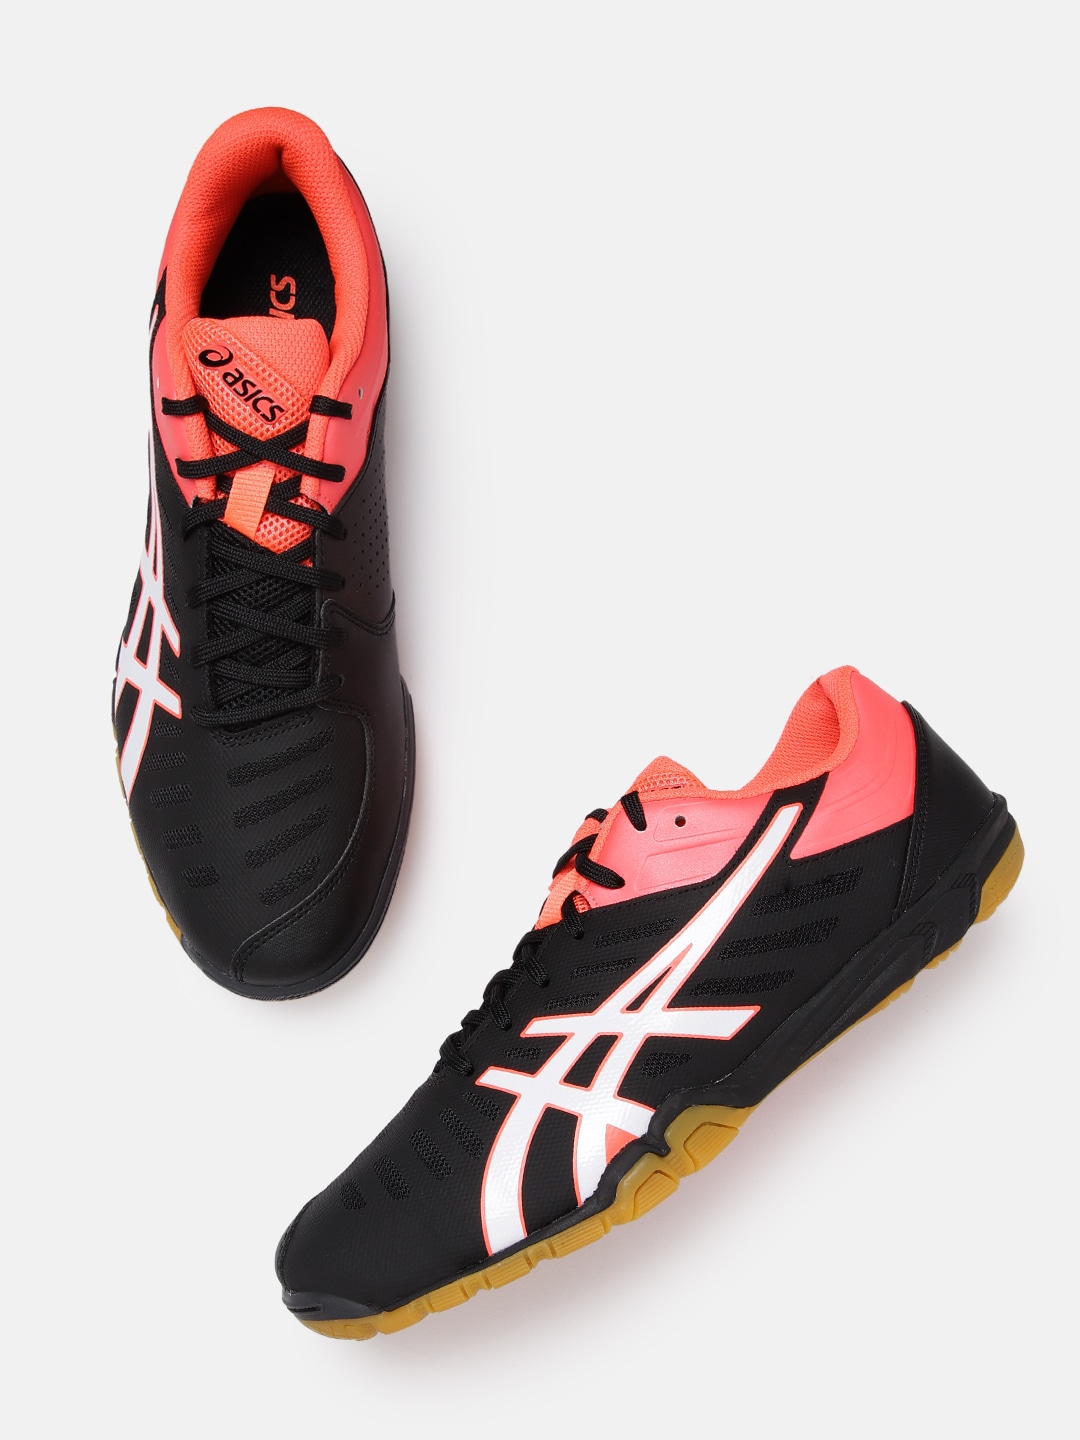 ASICS Unisex Black & Coral Woven Design Attack Excounter 2 Badminton Shoes Price in India